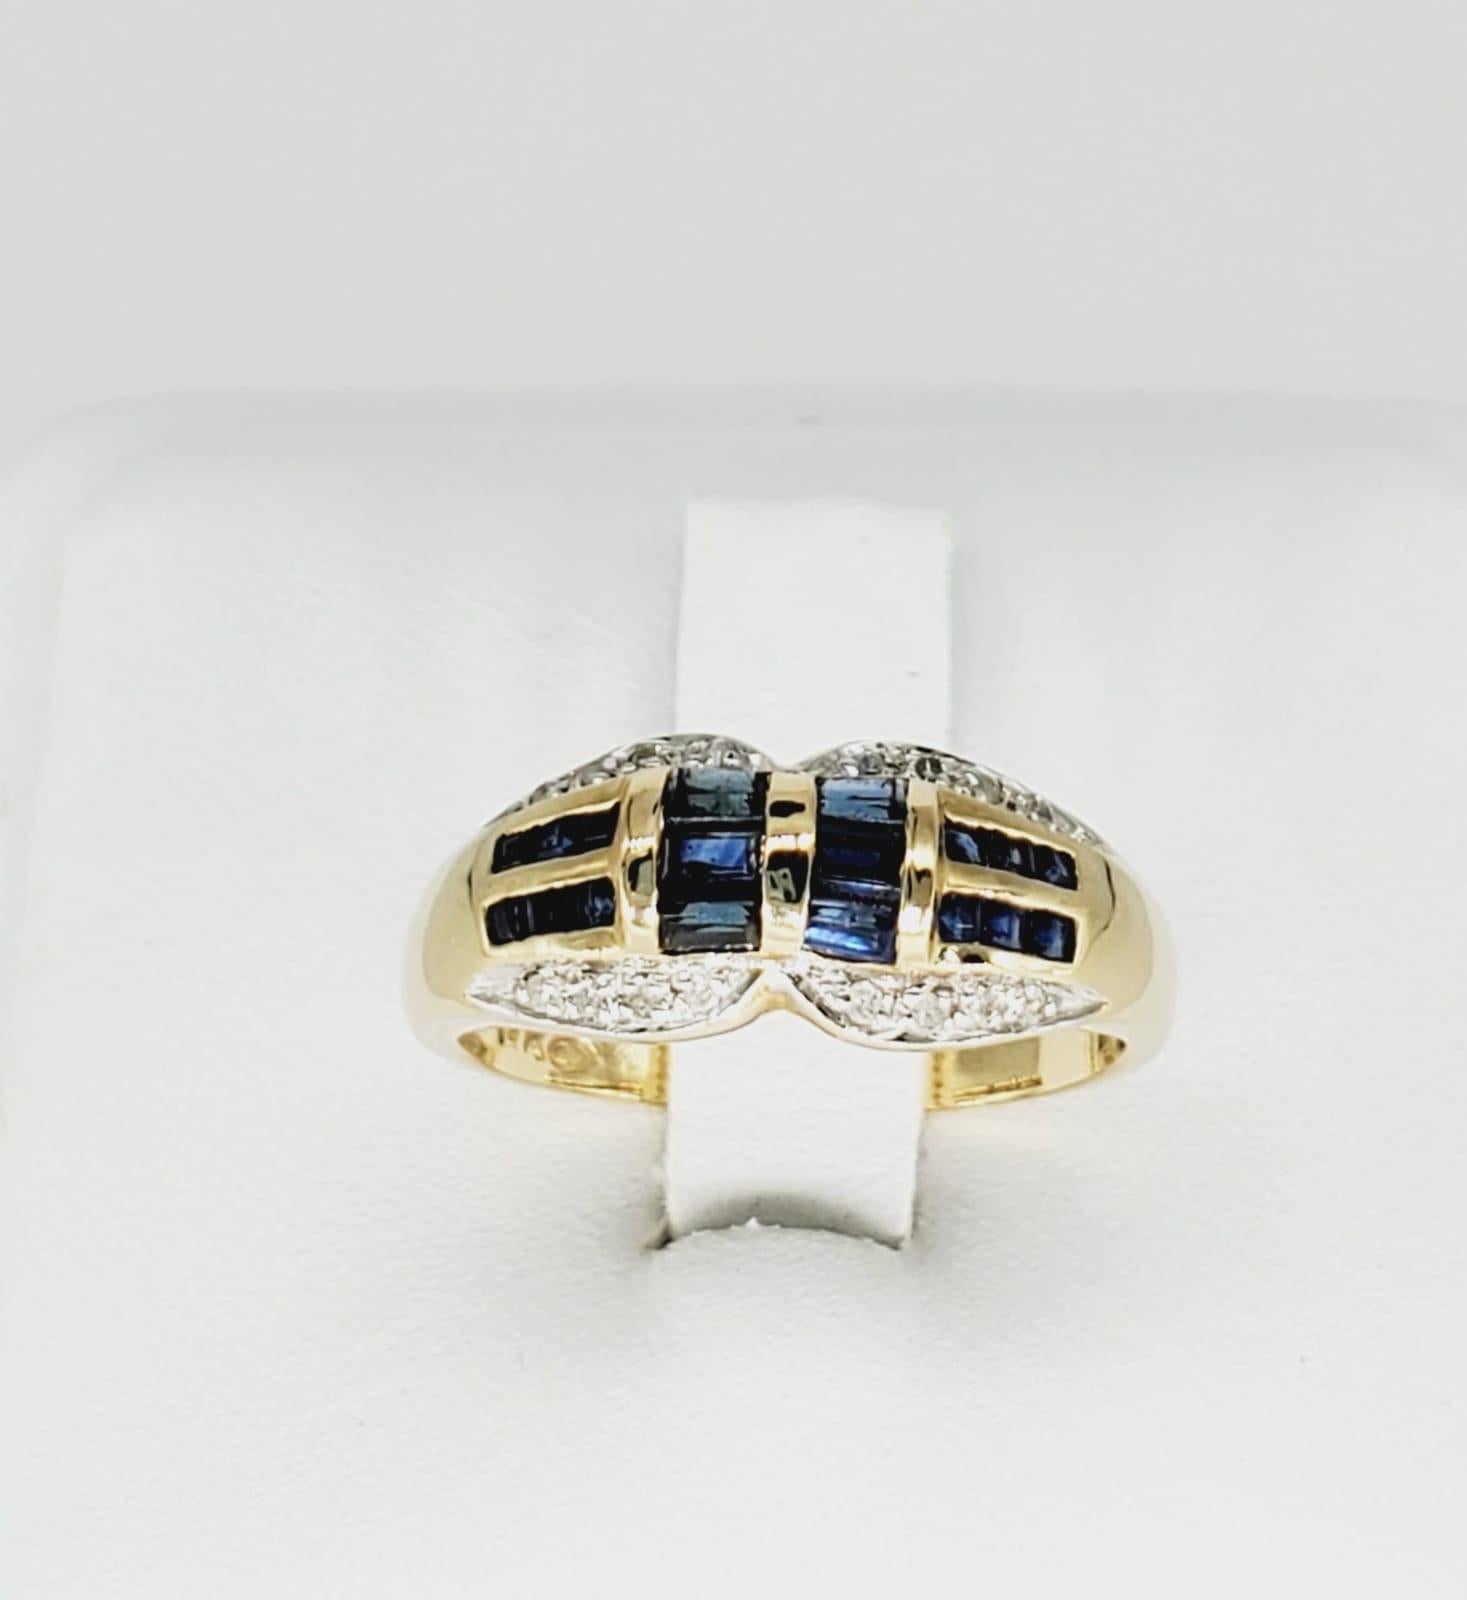 Vintage 1.00 Carat Blue Sapphires and White Diamonds 14 Karat Gold Ring In Excellent Condition For Sale In Miami, FL